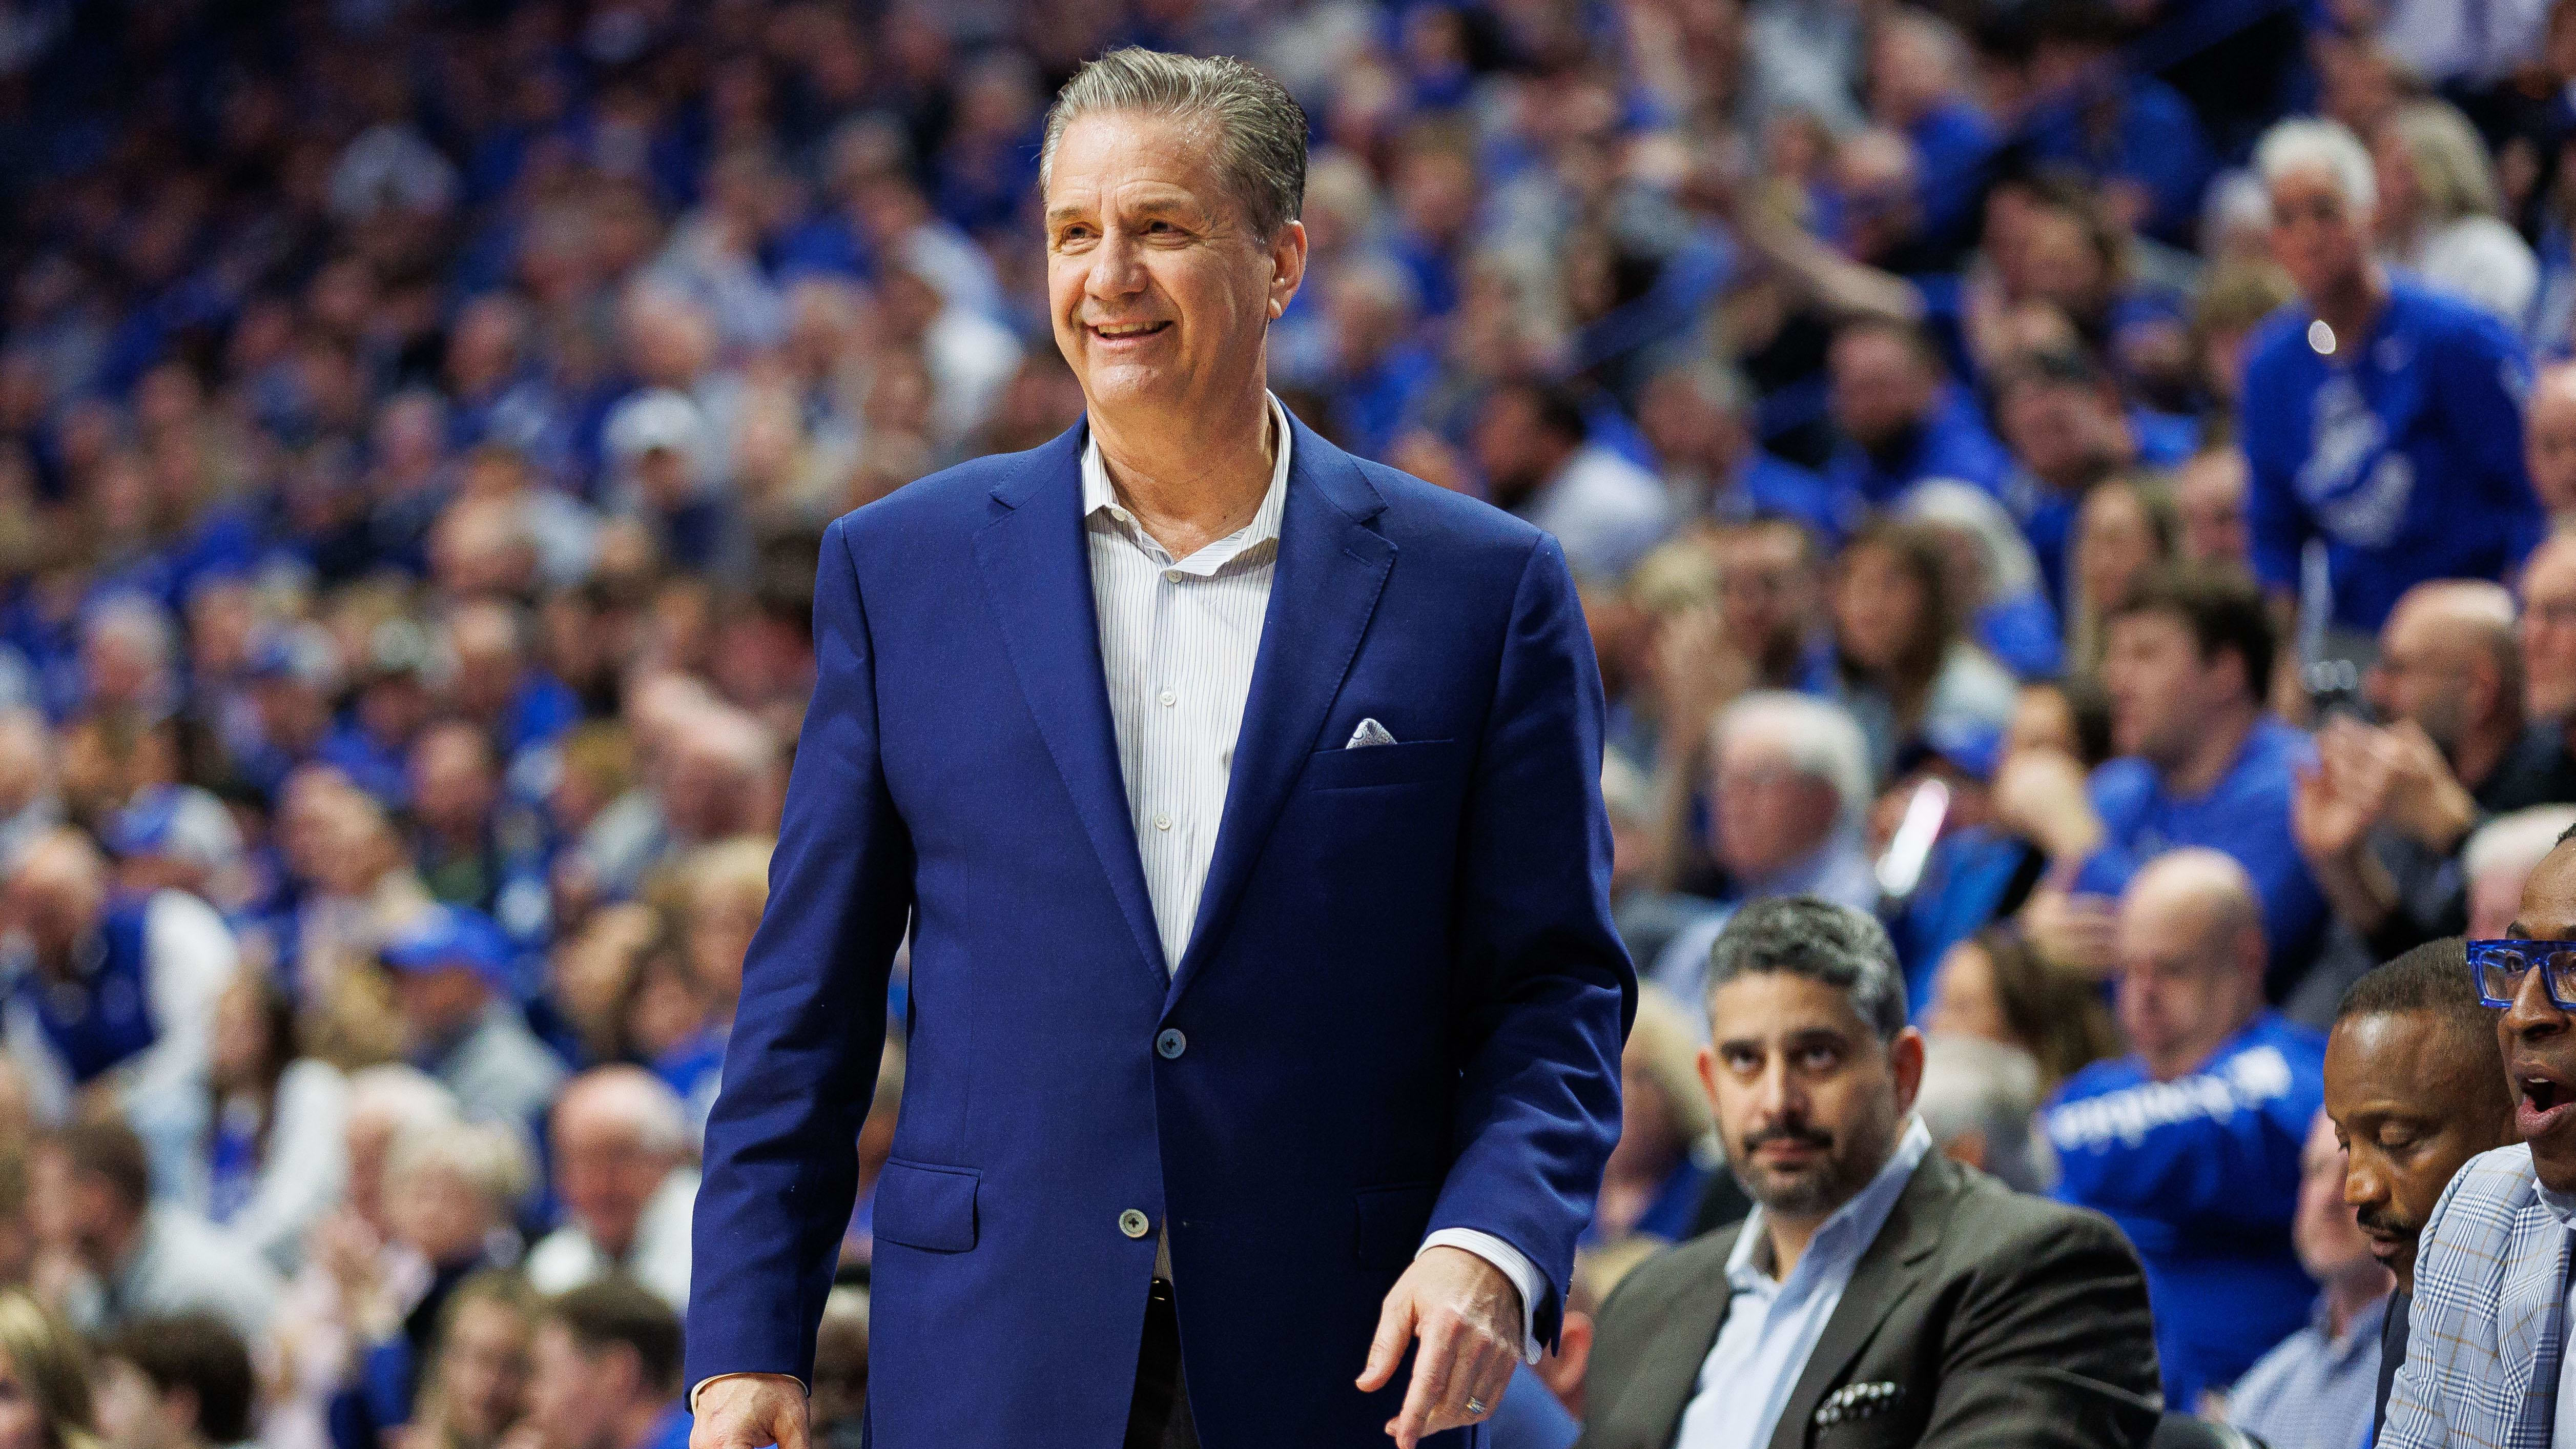 Calipari might have made the biggest move in the coaching carousel this offseason.